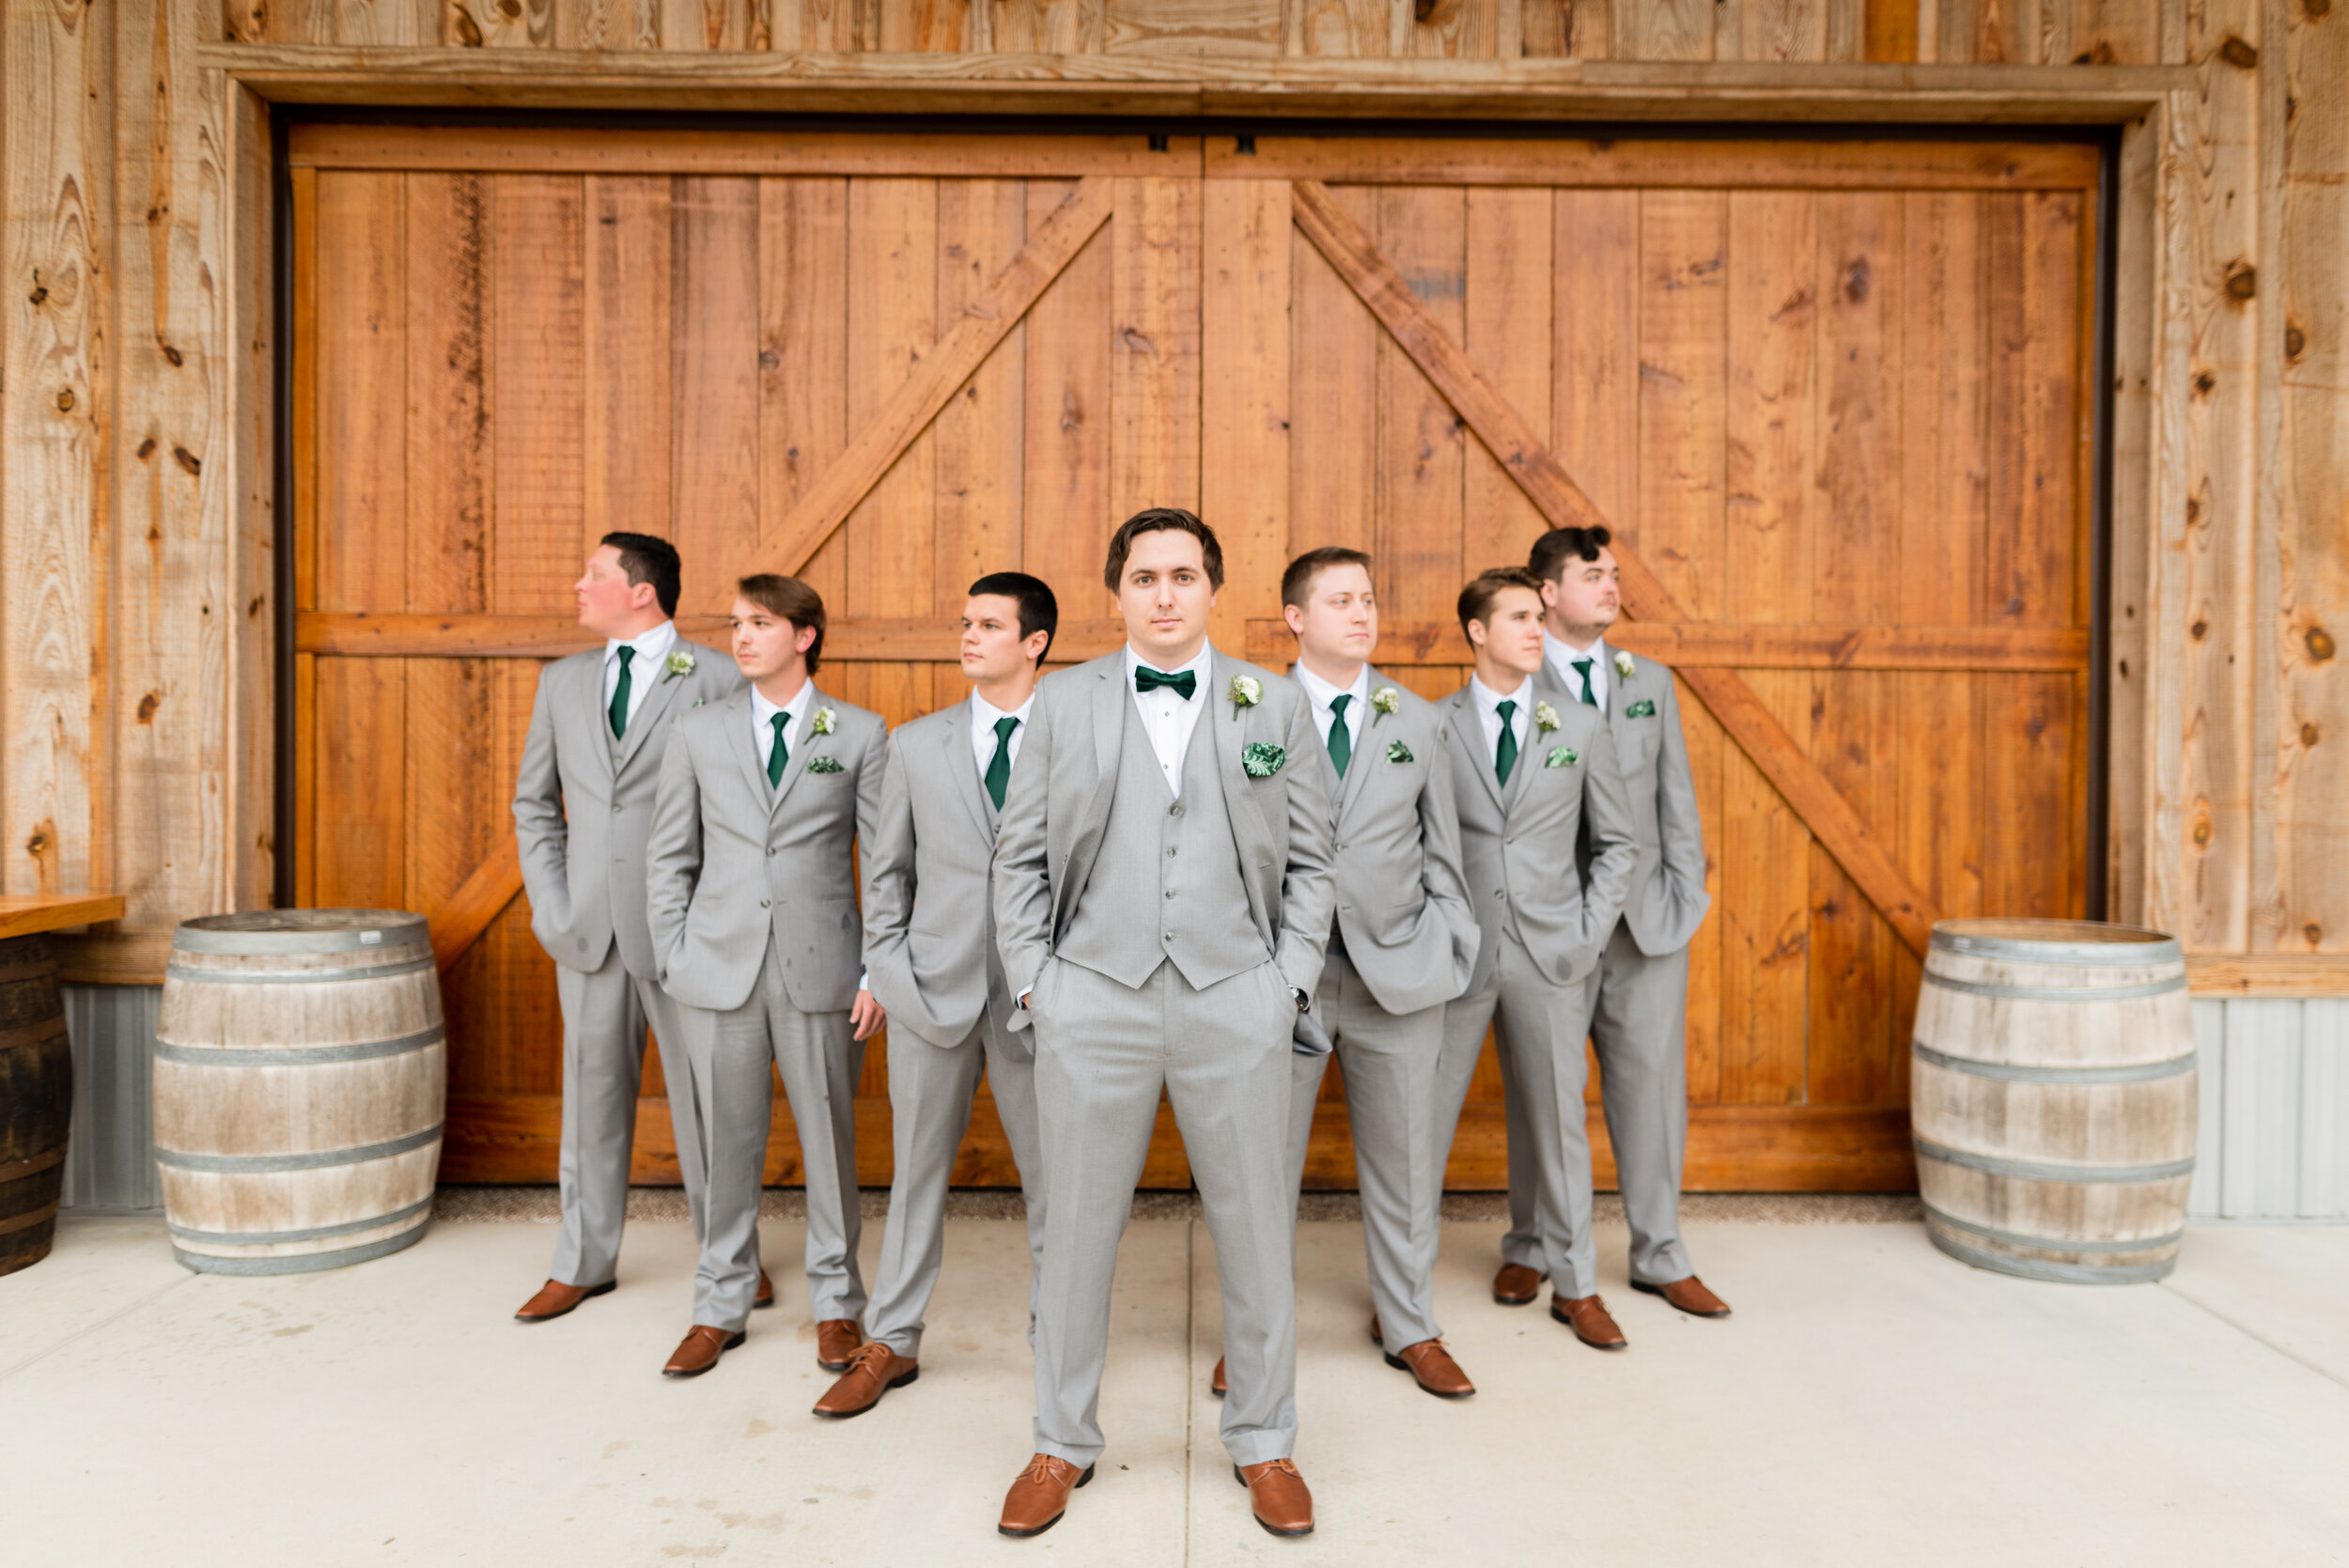 Hayes Farm Wedding Photography Photographed  by Kristen Marcus Photography